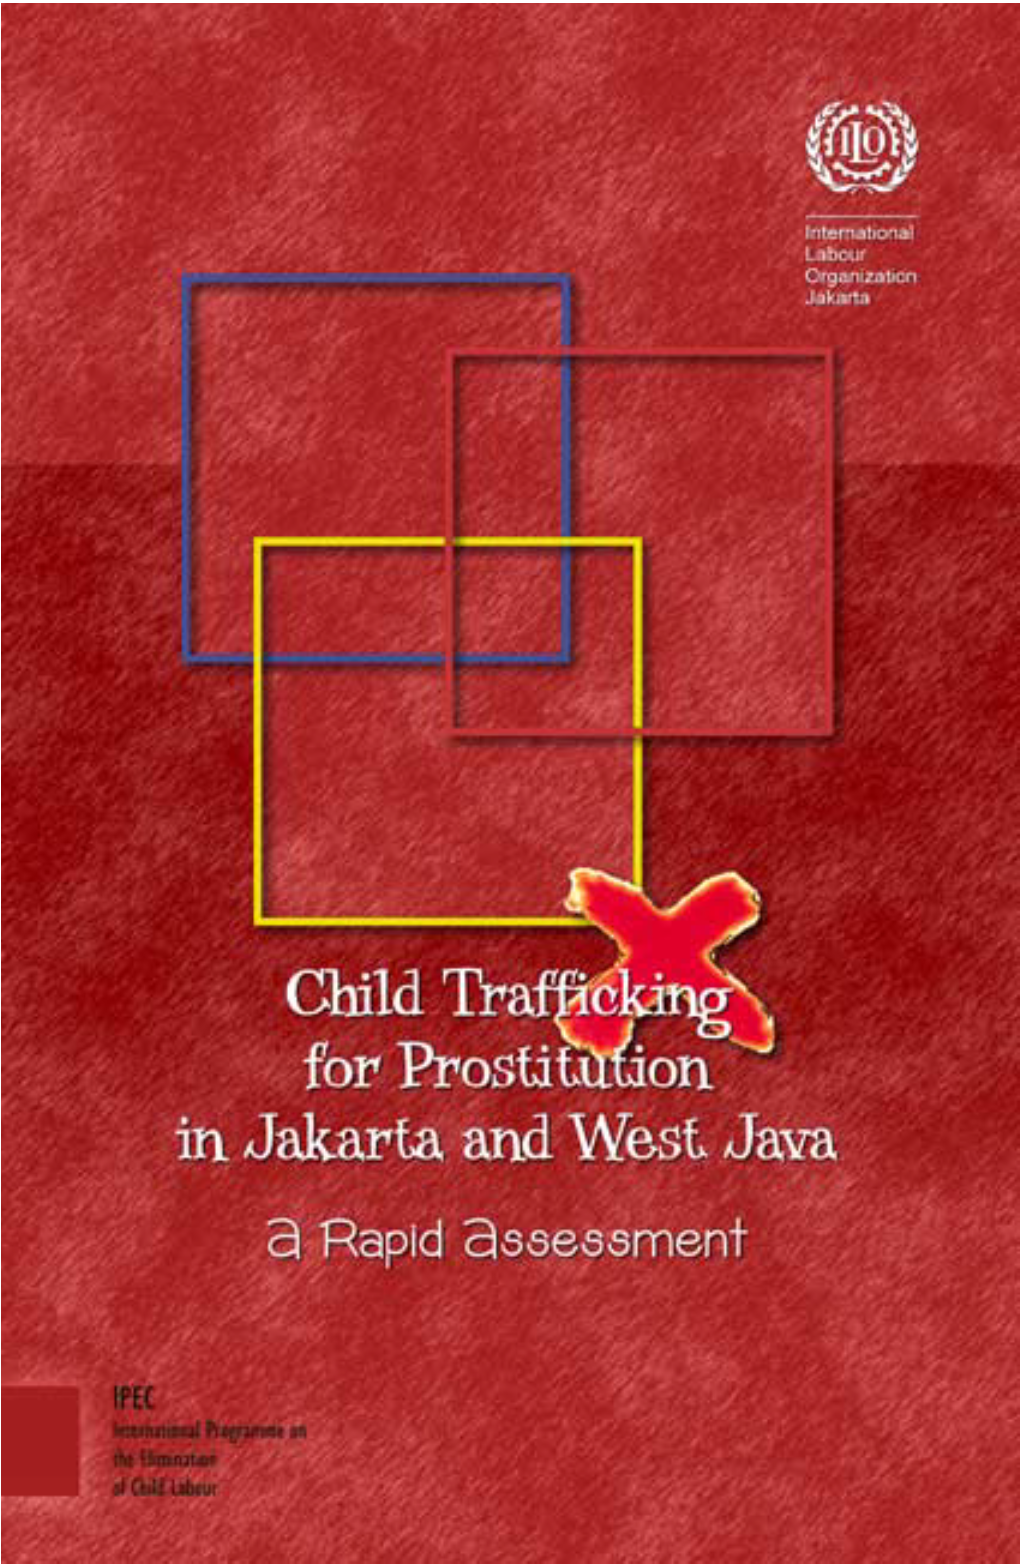 Child Trafficking for Prostitution in Jakarta and West Java a Rapid Assessment